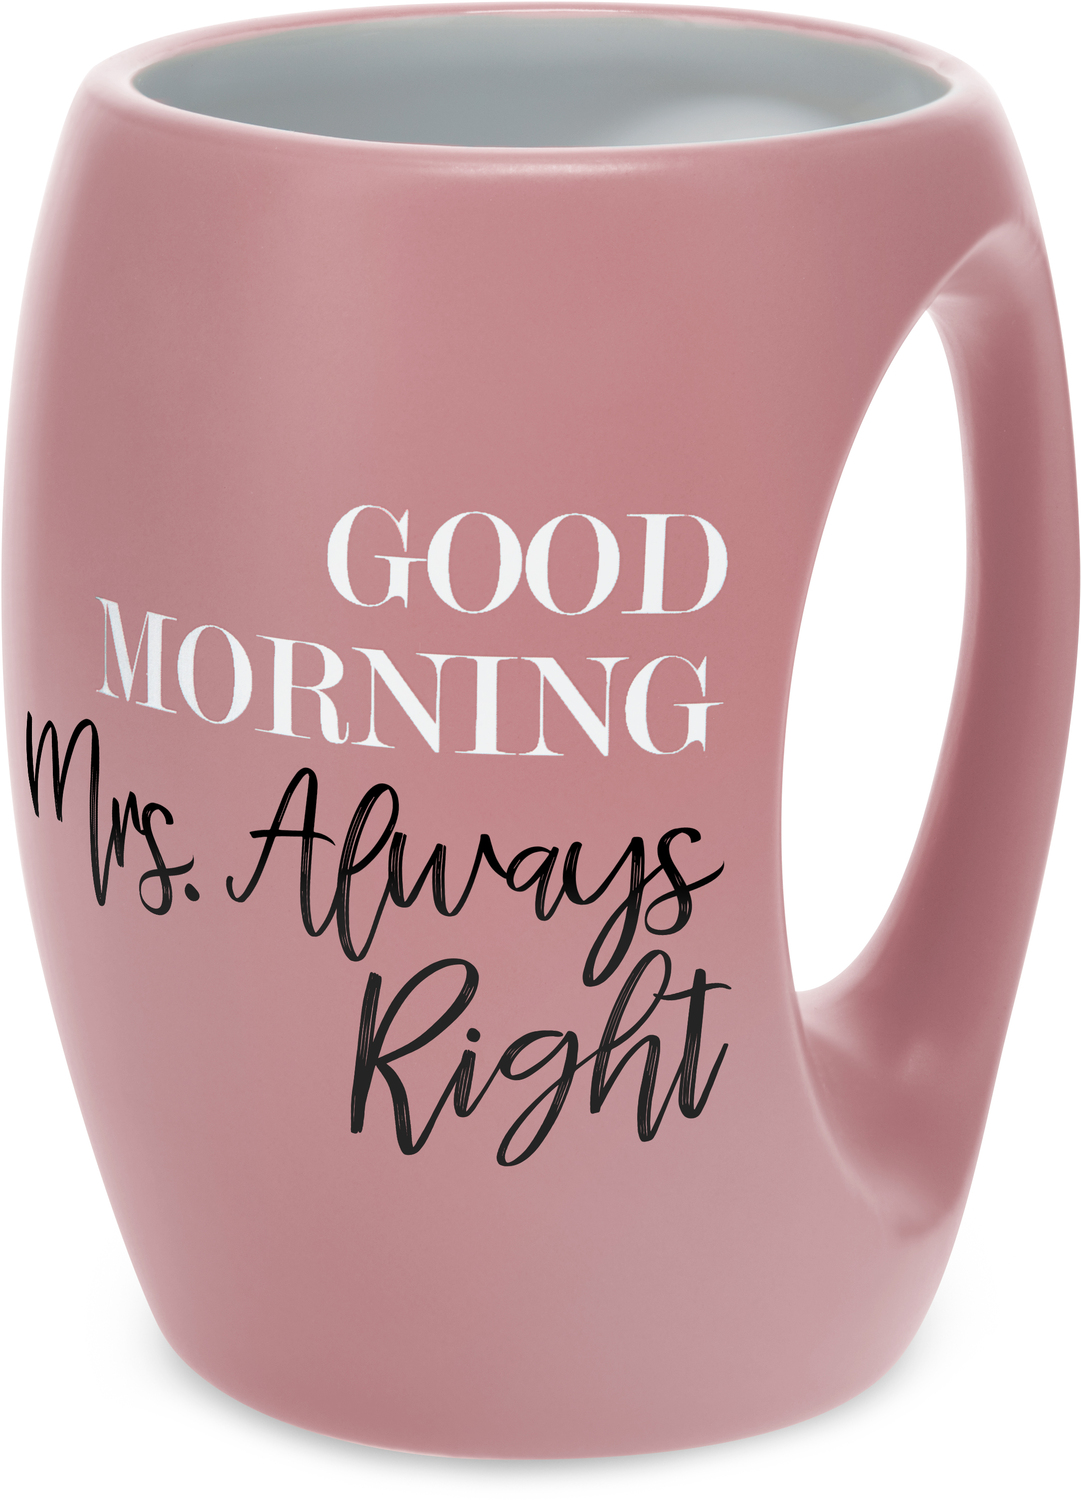 Mrs. Always Right by Good Morning - Mrs. Always Right - 16 oz Cup